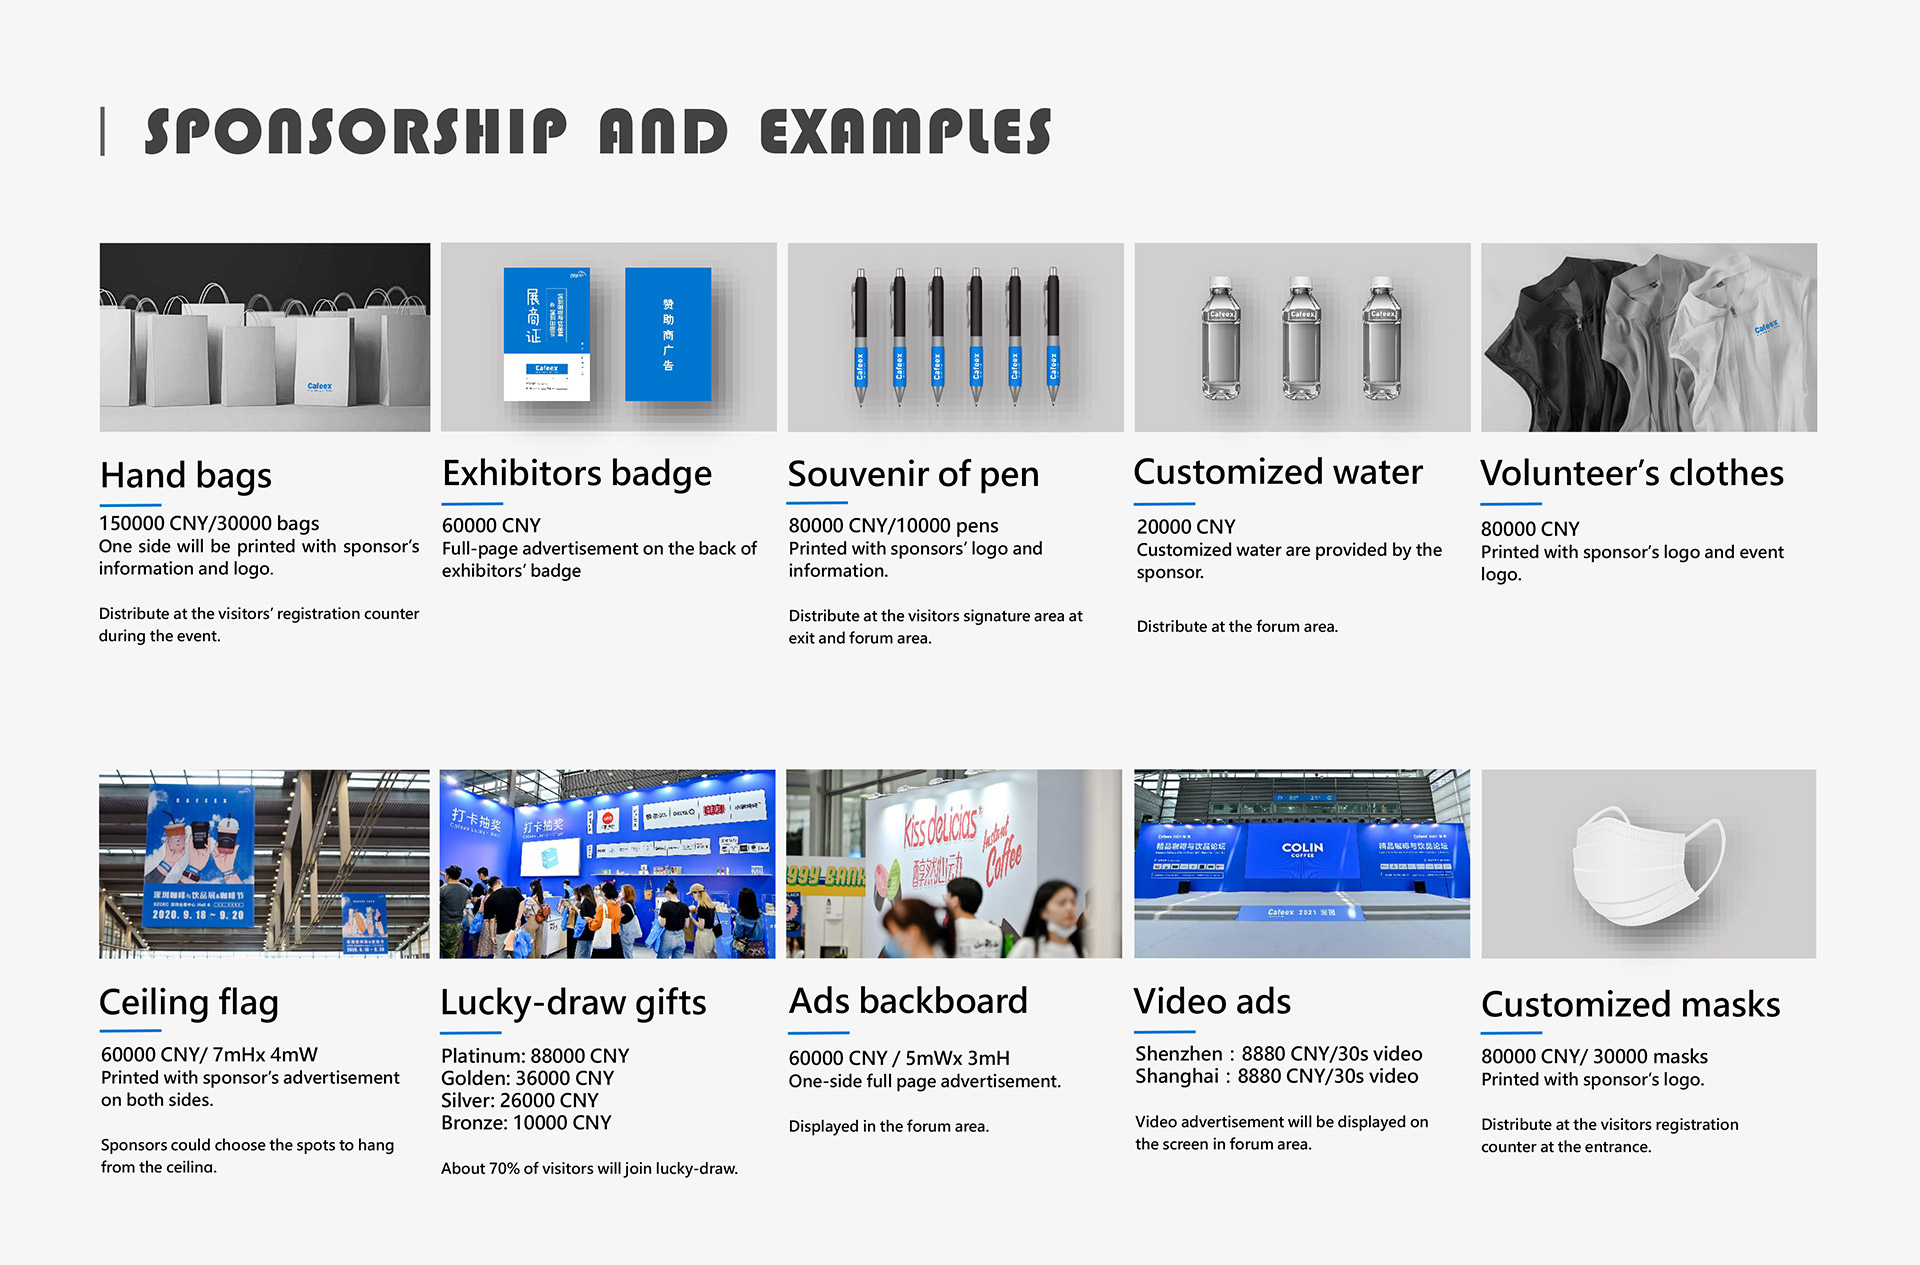 SPONSORSHIP AND EXAMPLES.jpg